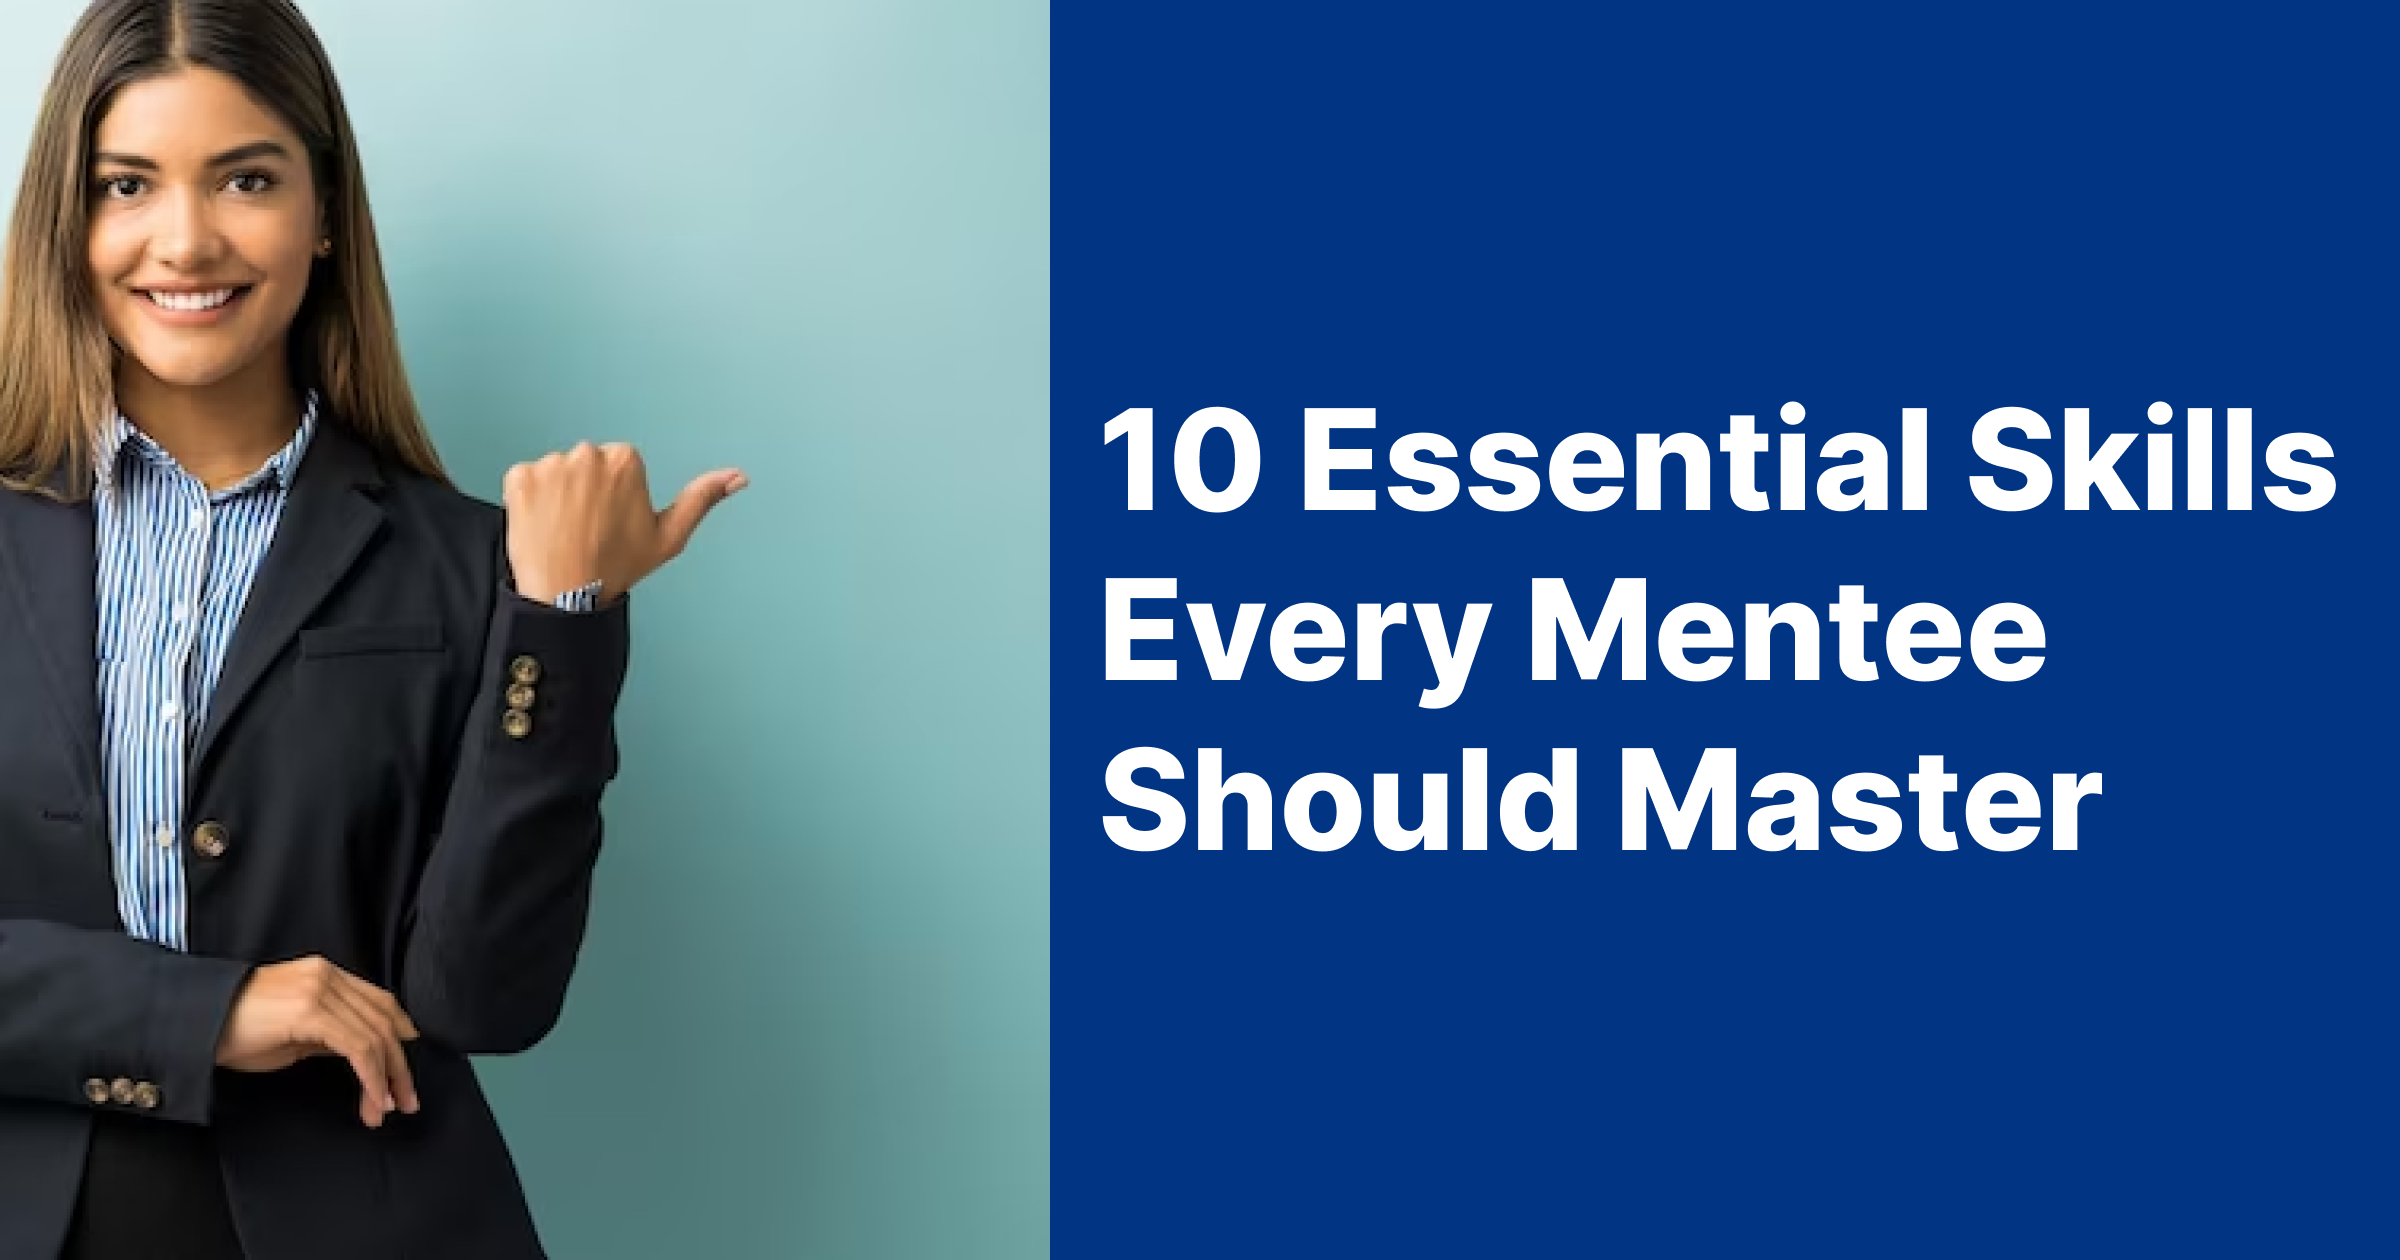 10 Essential Skills Every Mentee Should Master